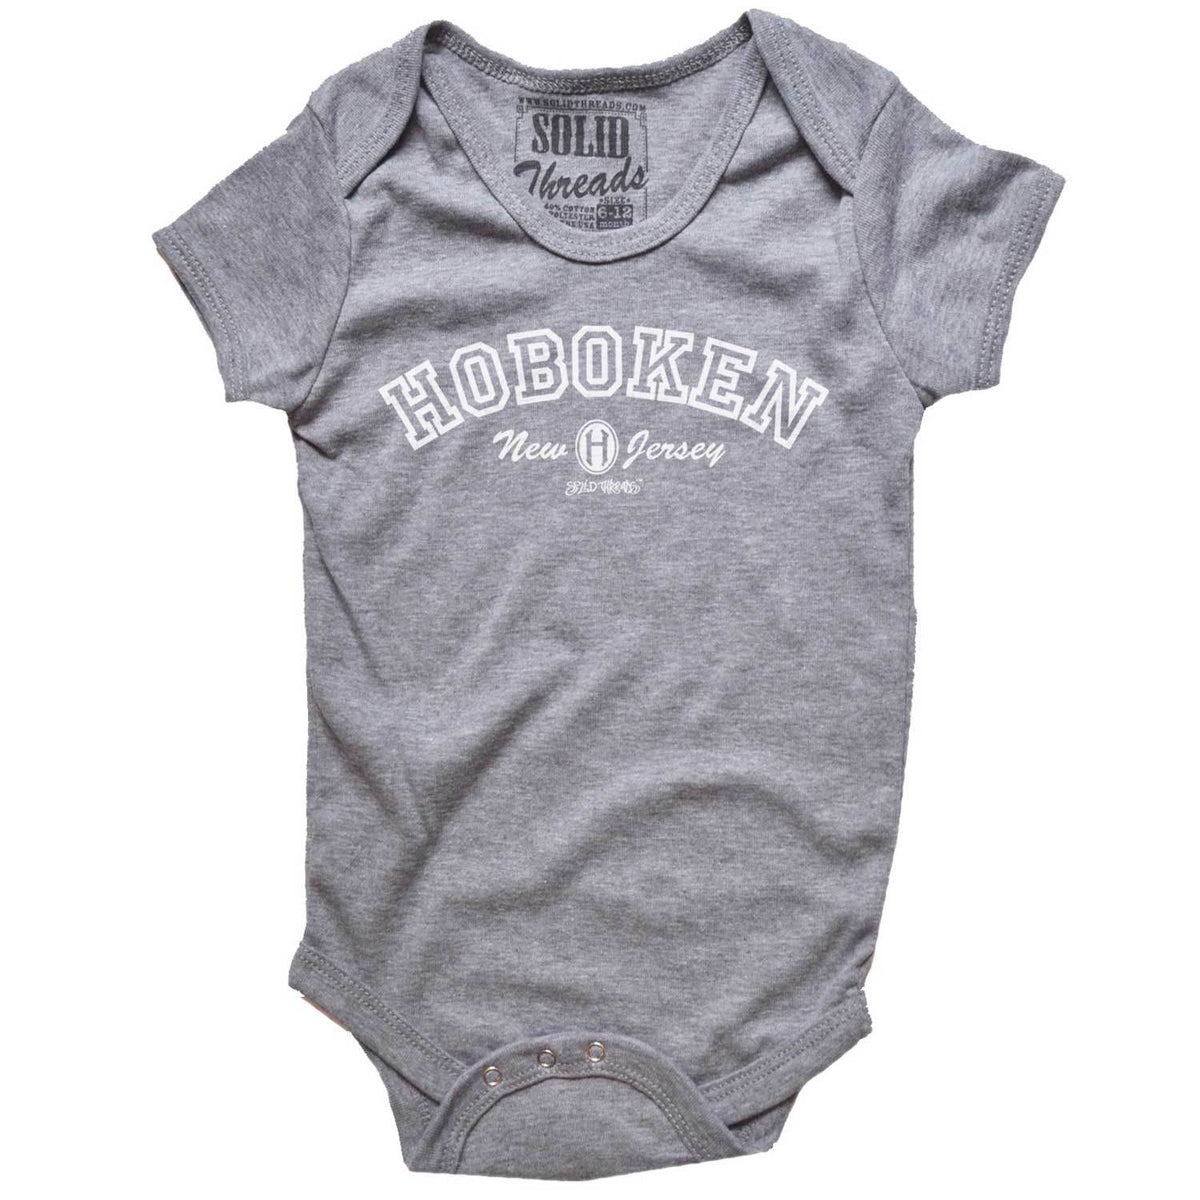 Baby Hoboken Collegiate Cool Graphic One Piece | Retro New Jersey Soft Romper | Solid Threads